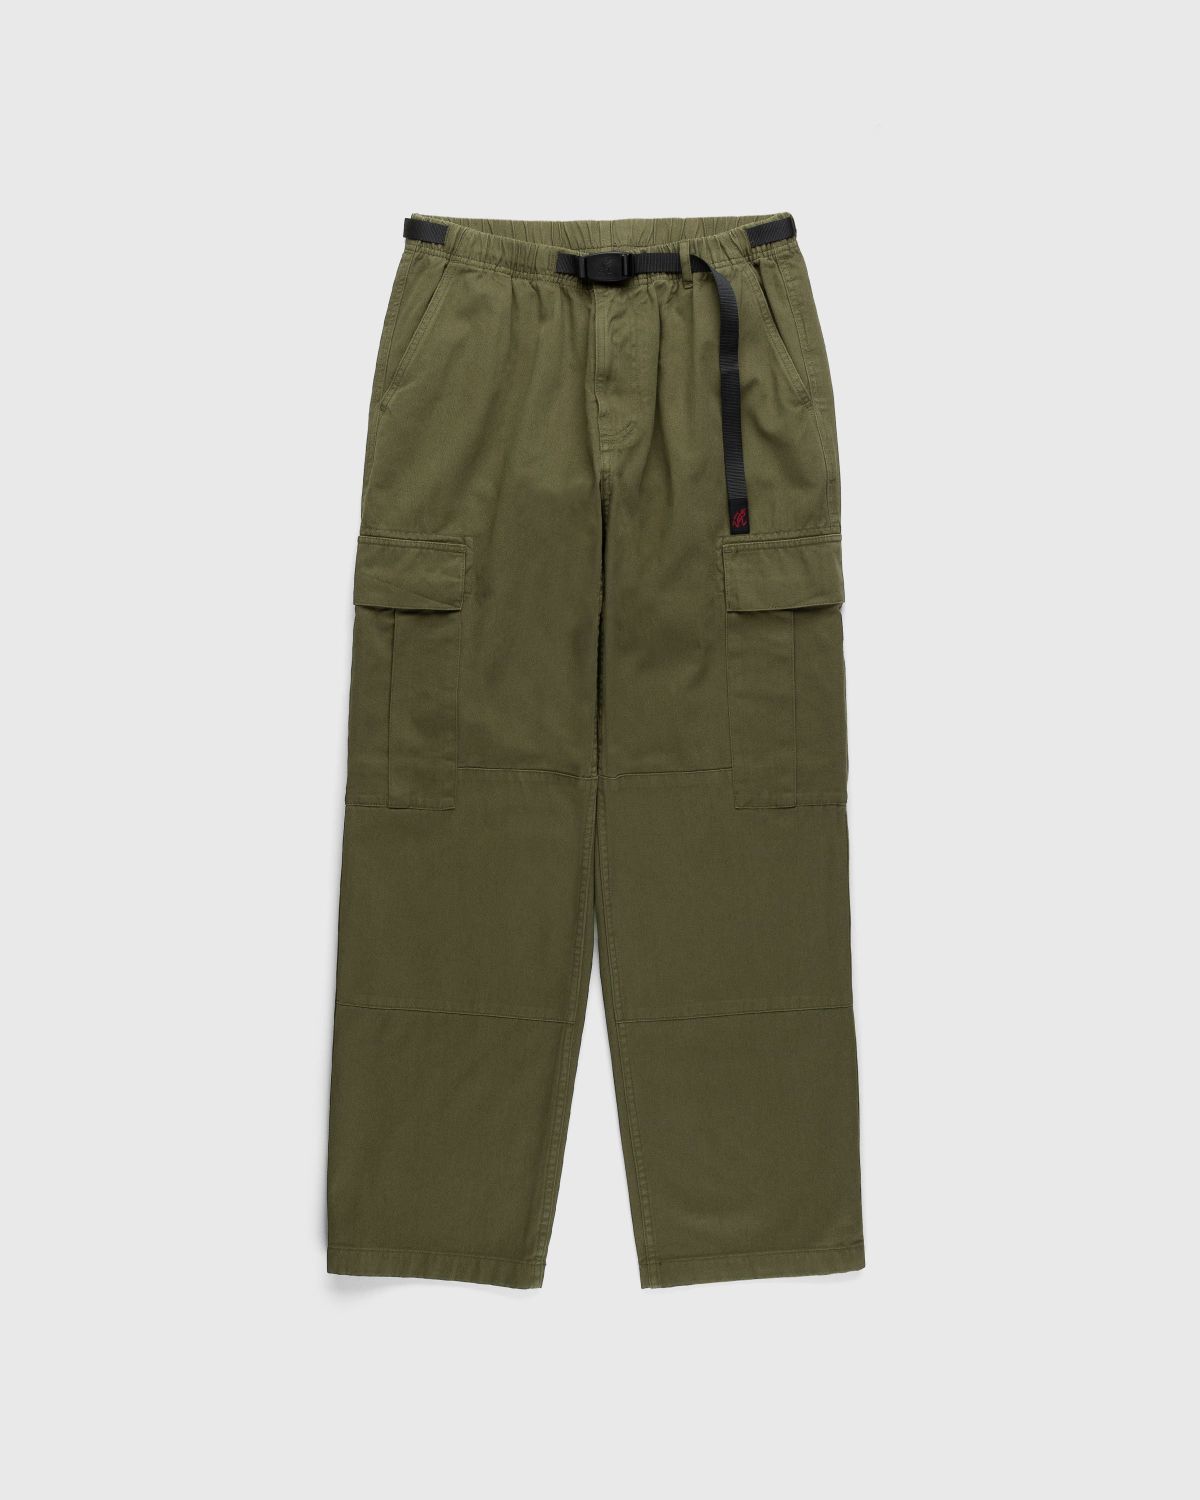 Gramicci – Cargo Pant Olive - Cargo Pants - Green - Image 1